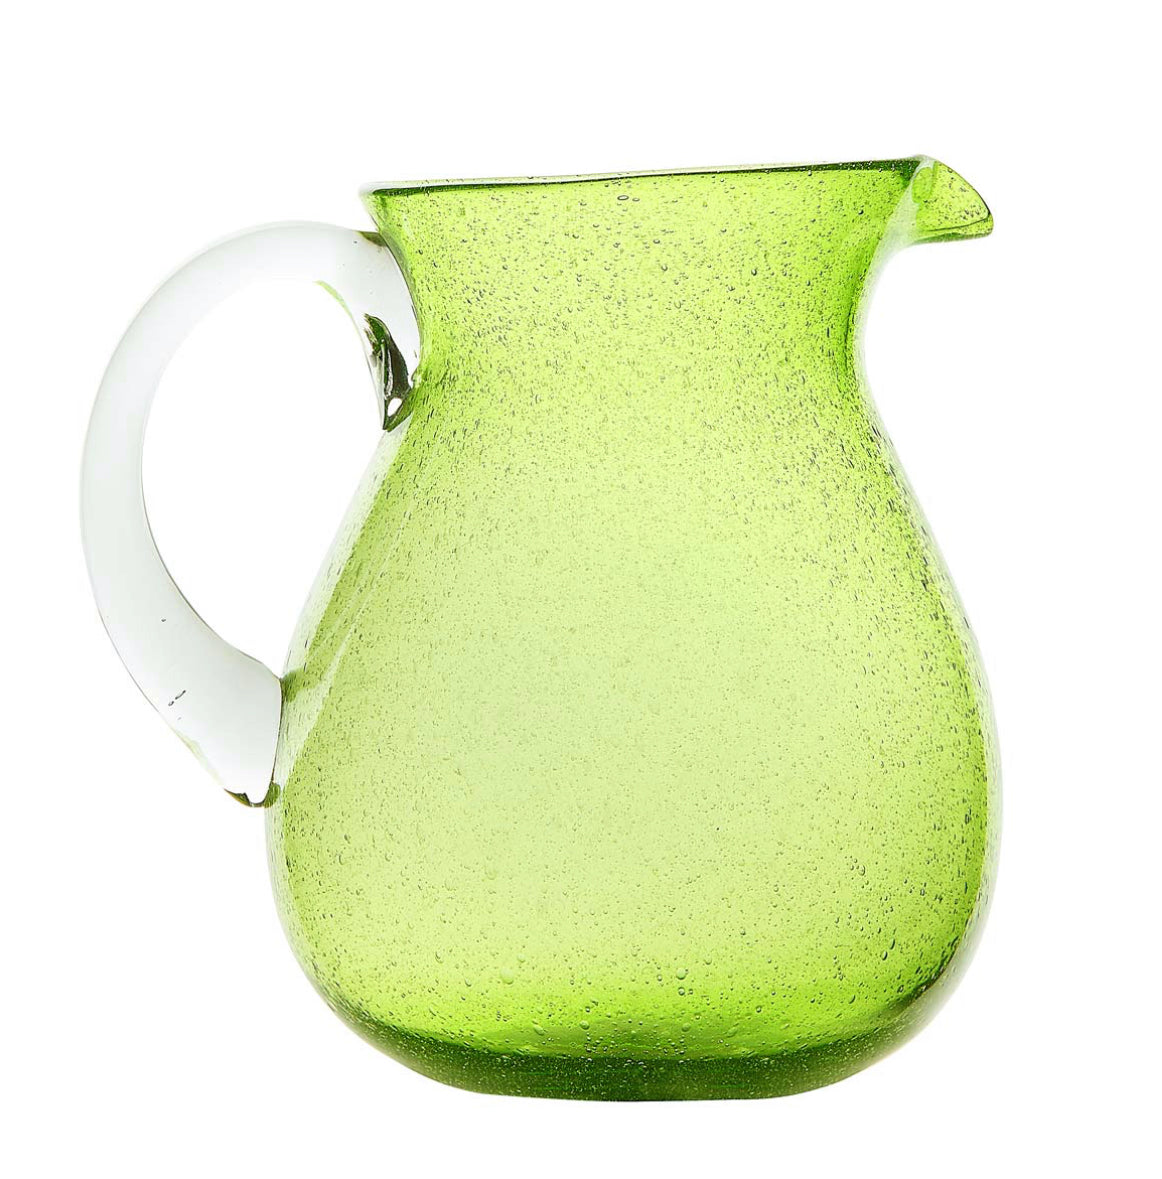 Pitcher - Lime